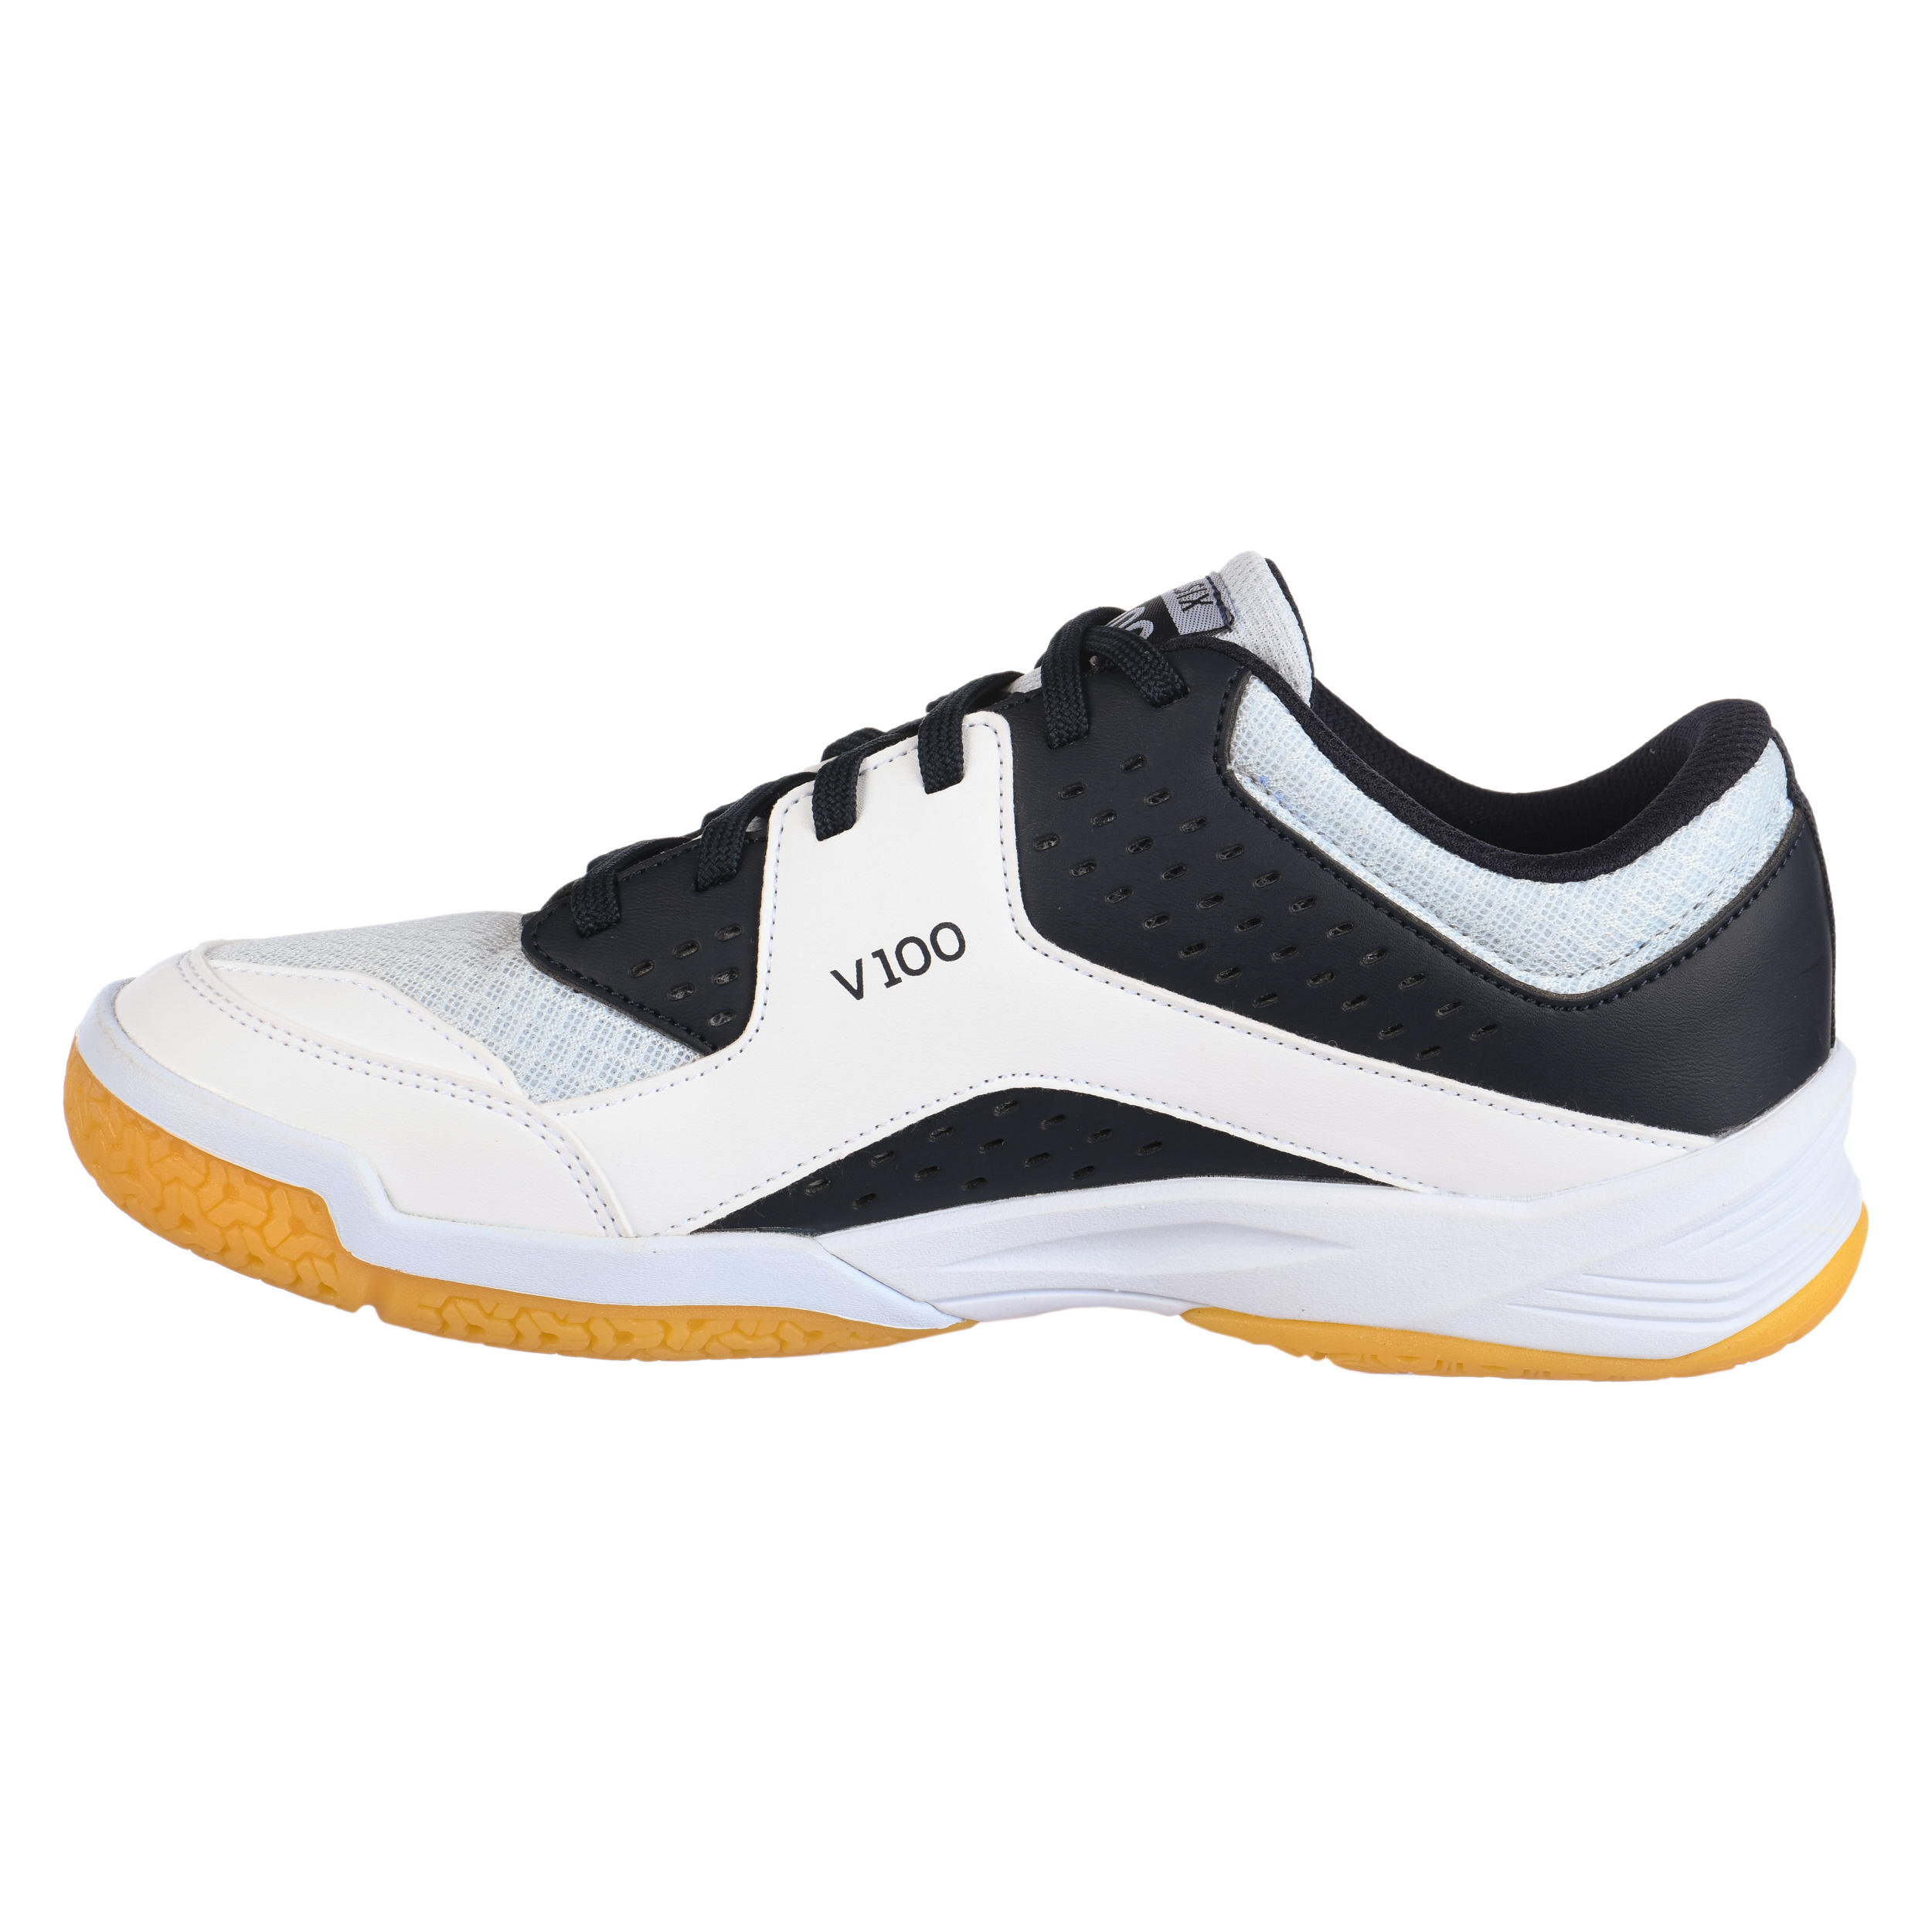 white volleyball shoes women